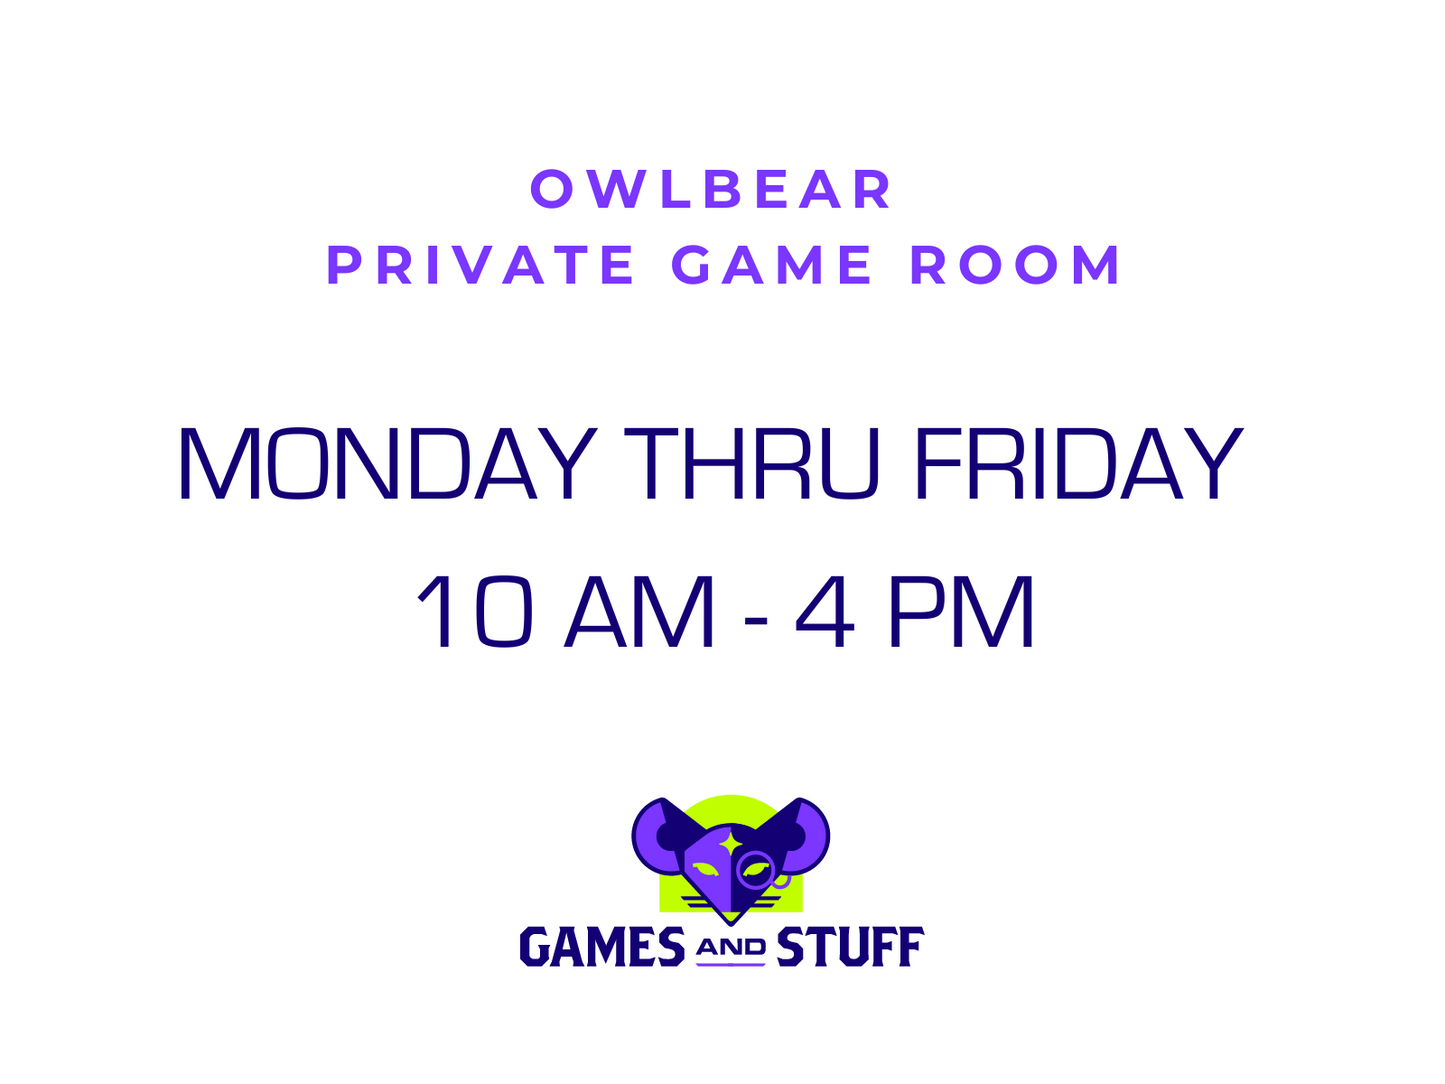 OWLBEAR PRIVATE GAME ROOM - MONDAY THRU FRIDAY DAY